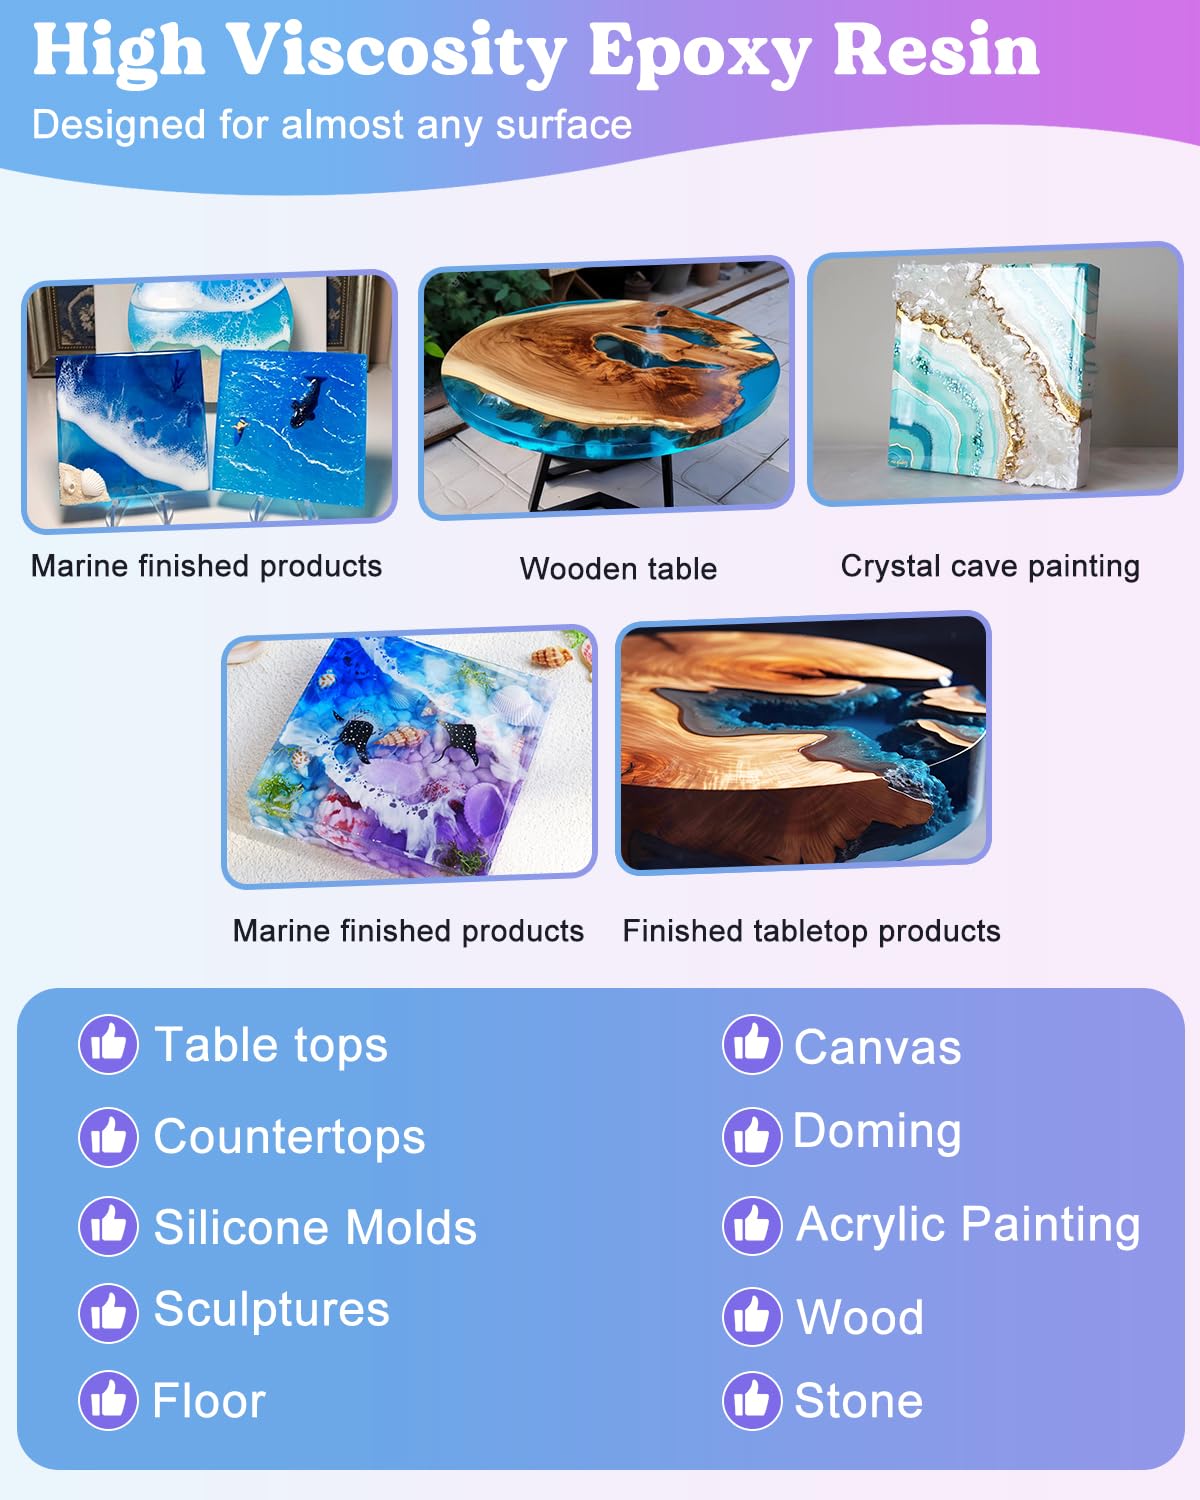 High viscosity epoxy resin designed for almost any surface